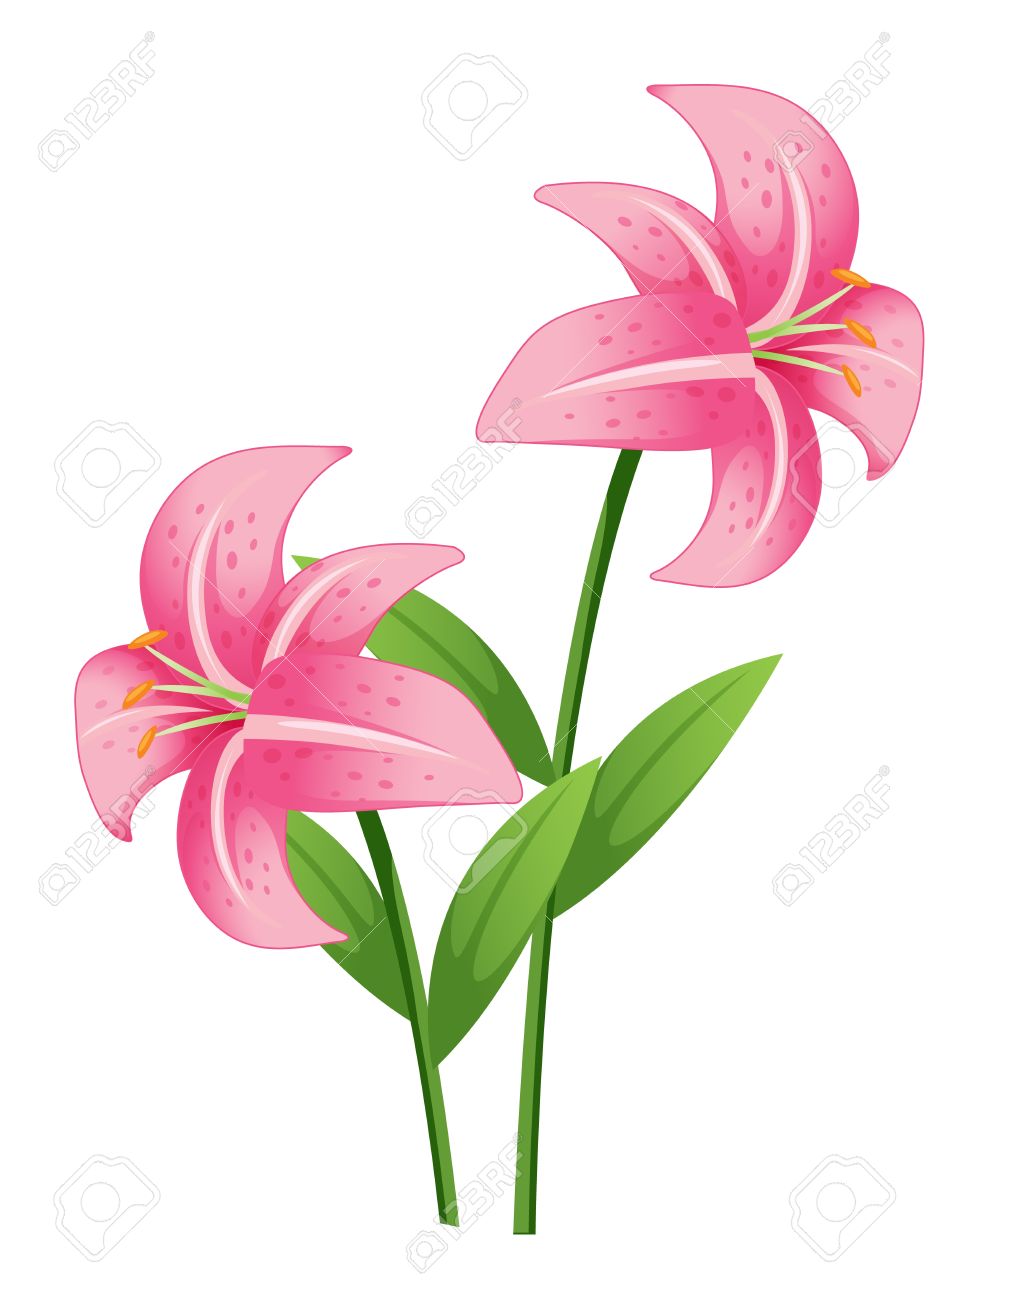 orchid flower clip art free - photo #39